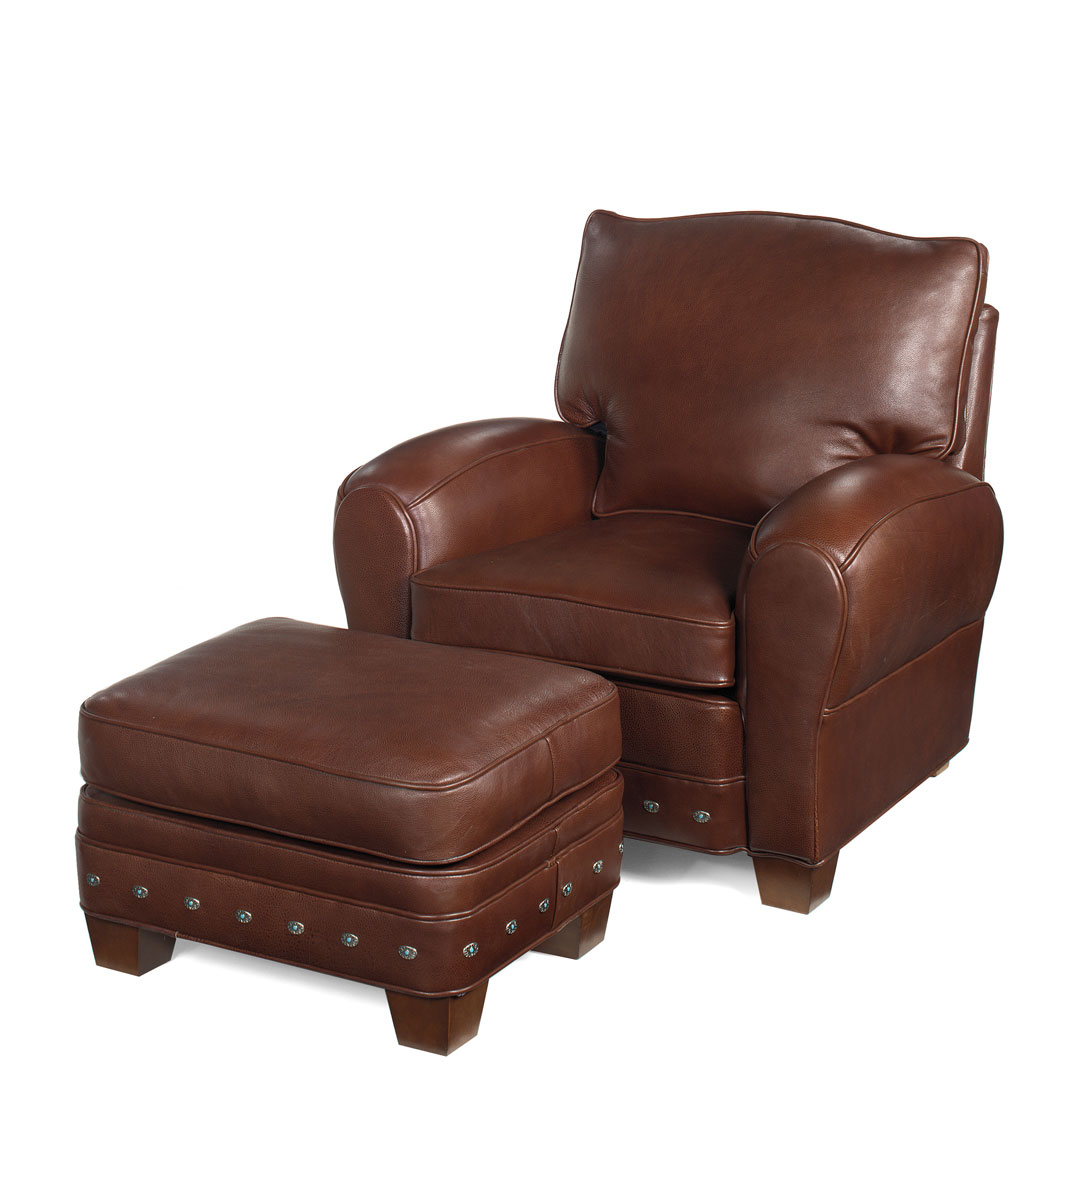 62 Stetson Vari-Tilt Chair with 60 Stetson Ottoman by McKinley Leather